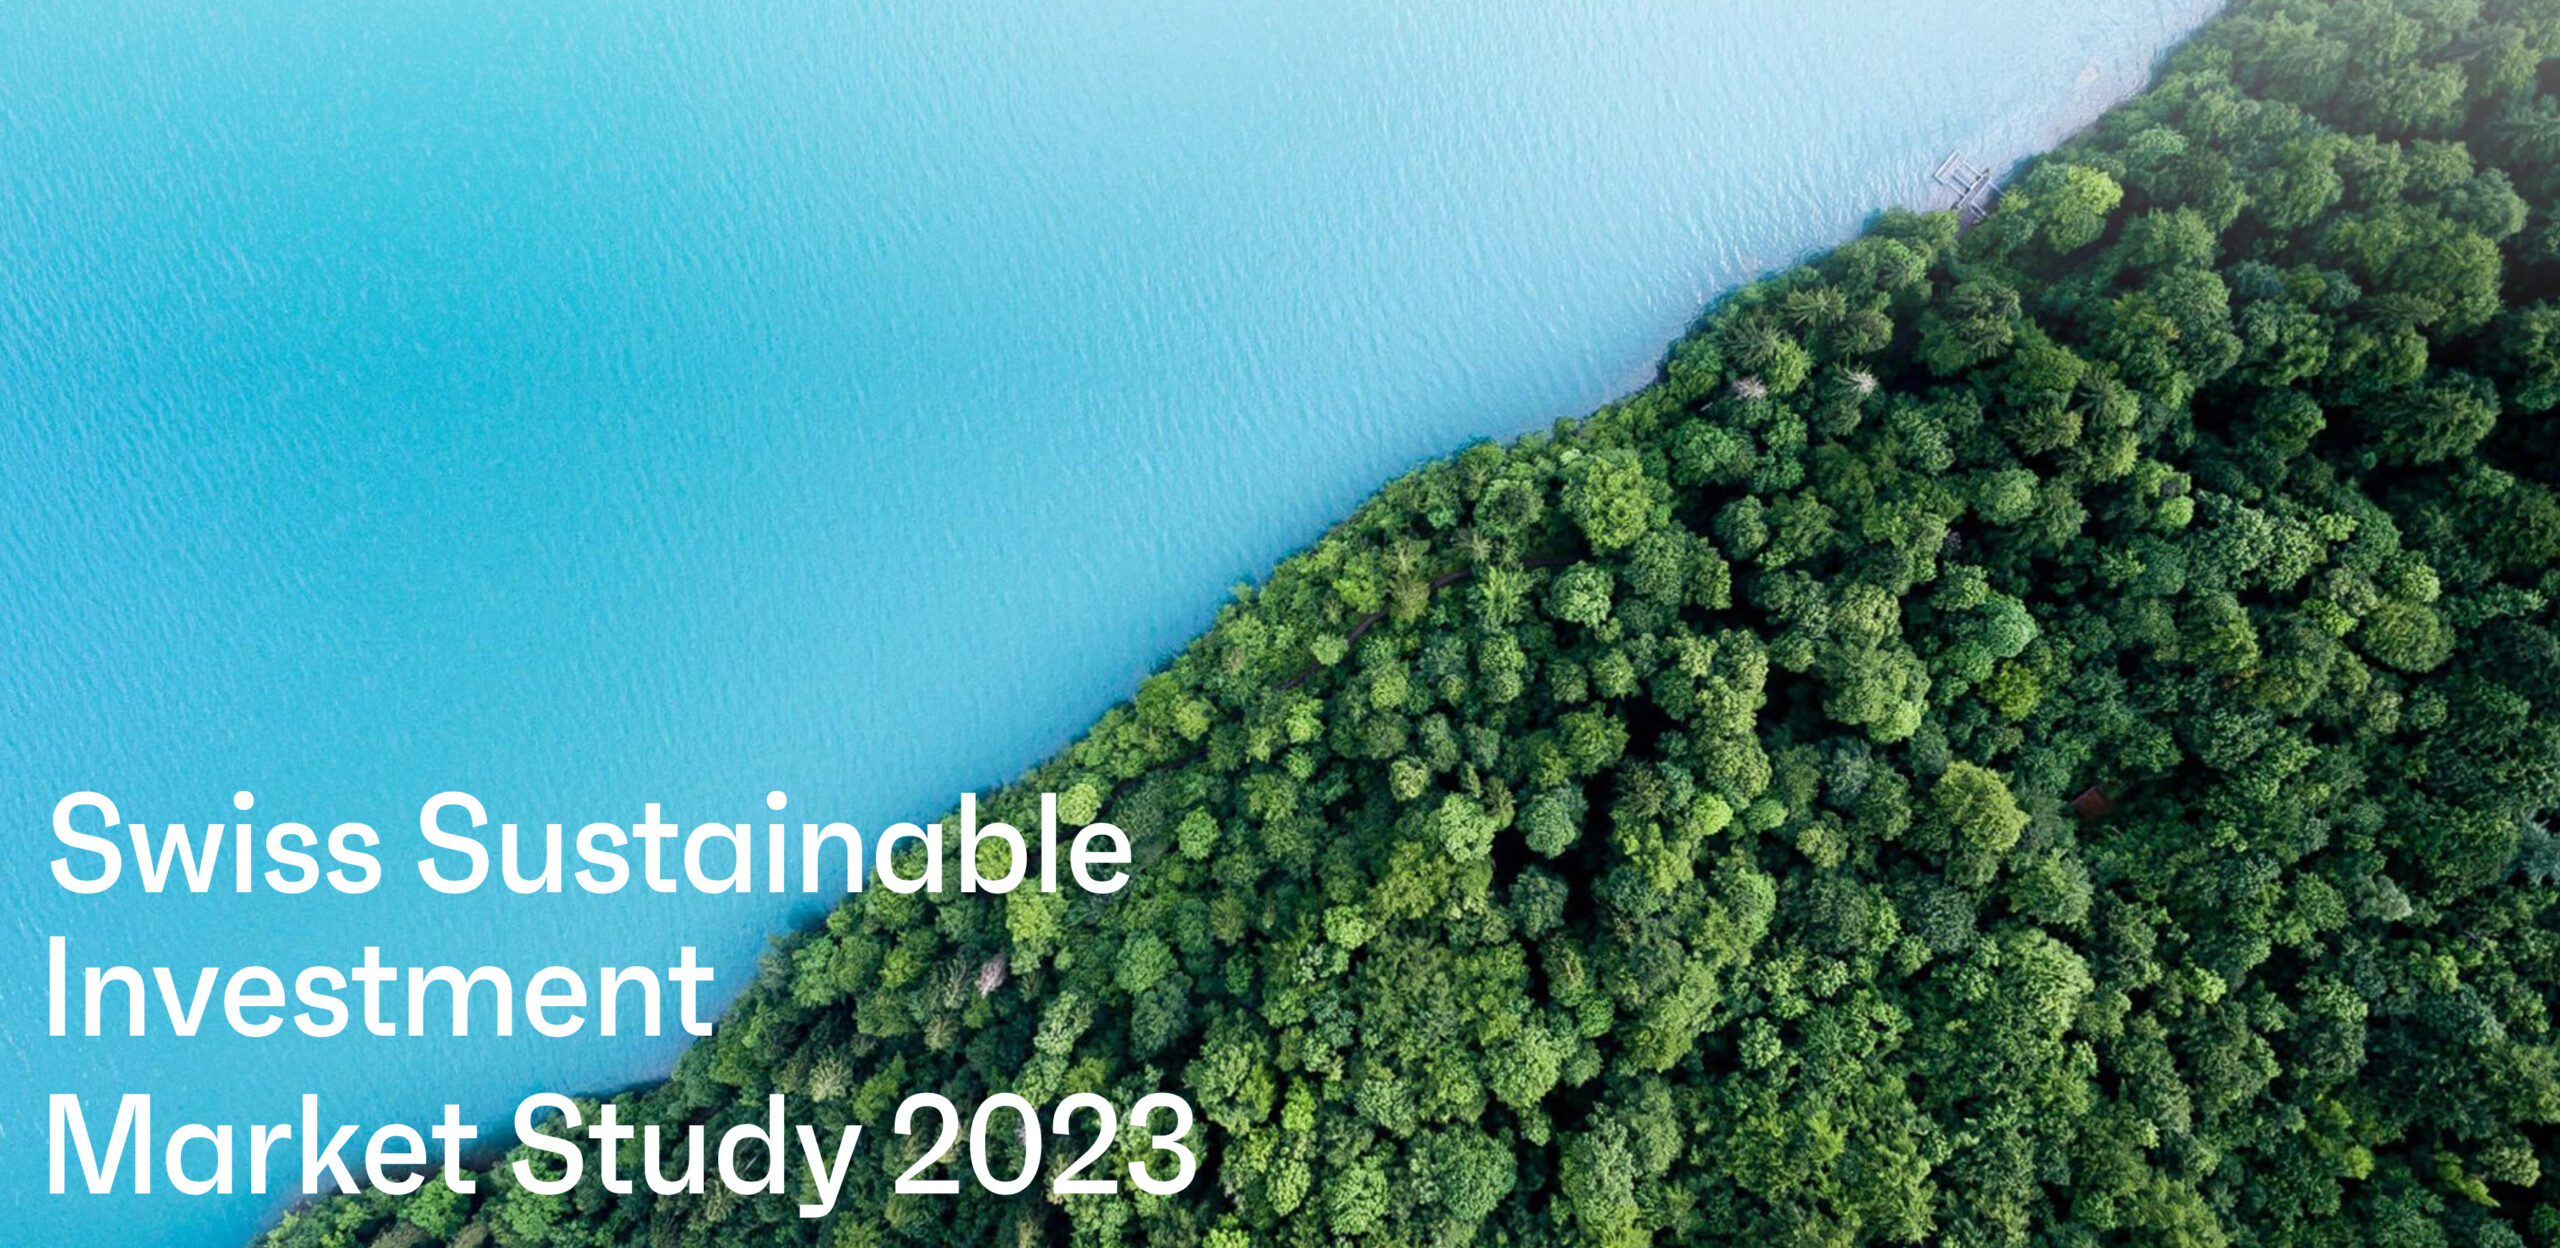 Swiss Sustainable Investment Market Study 2023